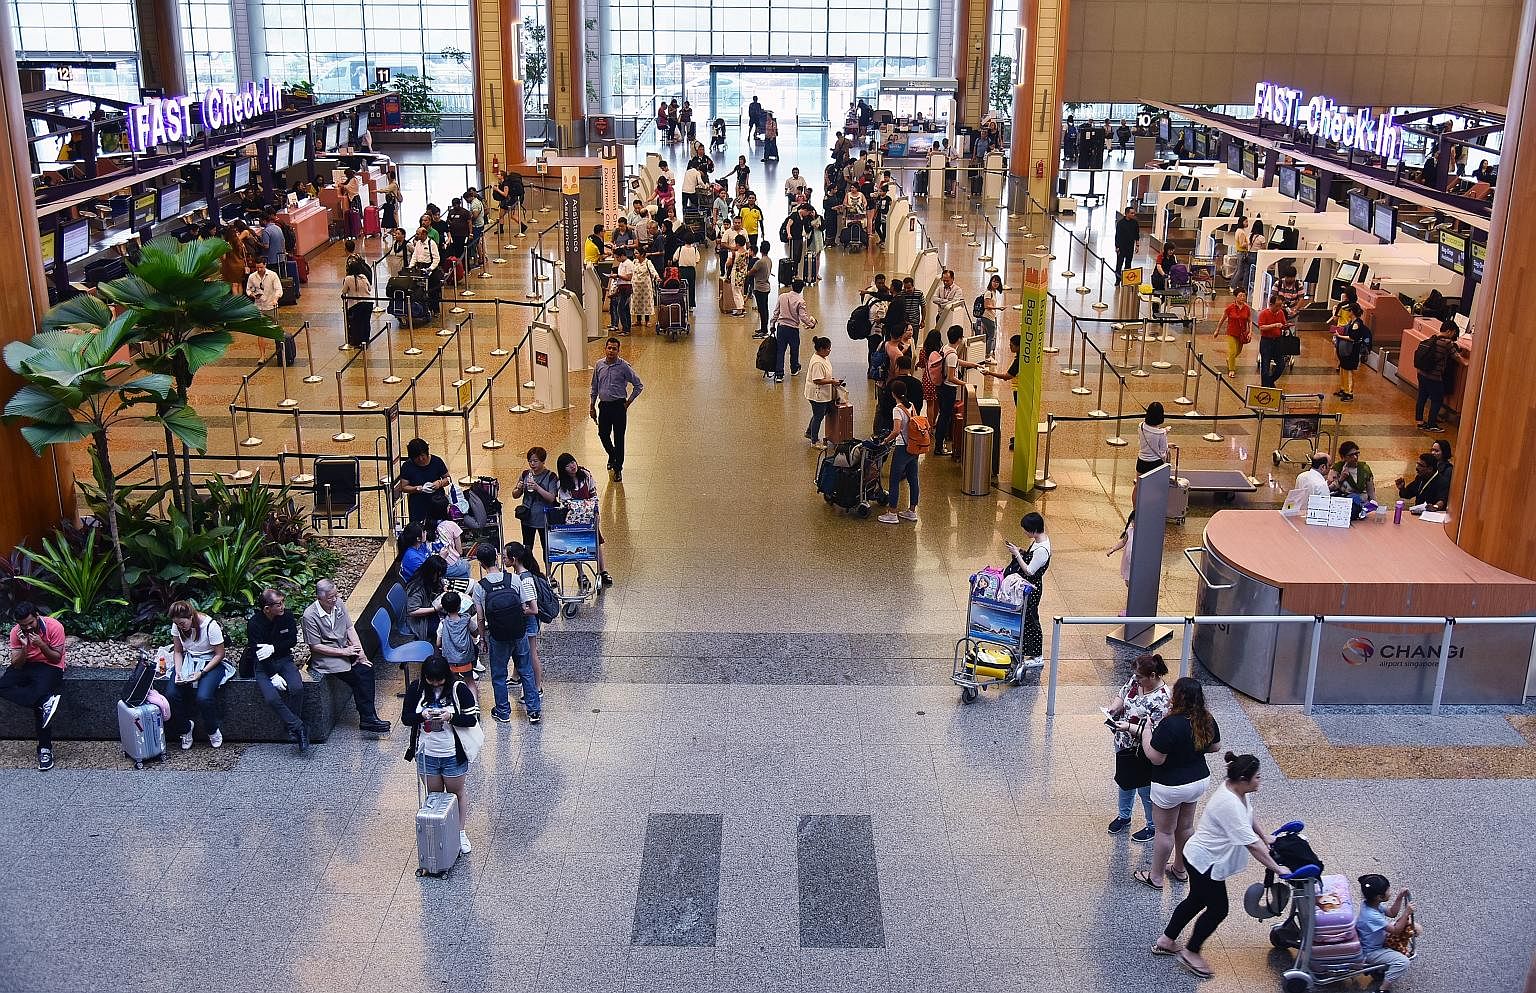 While overall passenger traffic at Changi Airport has not been affected by the fee increases so far, experts say this could change as airlines continue to cope with operating pressures.